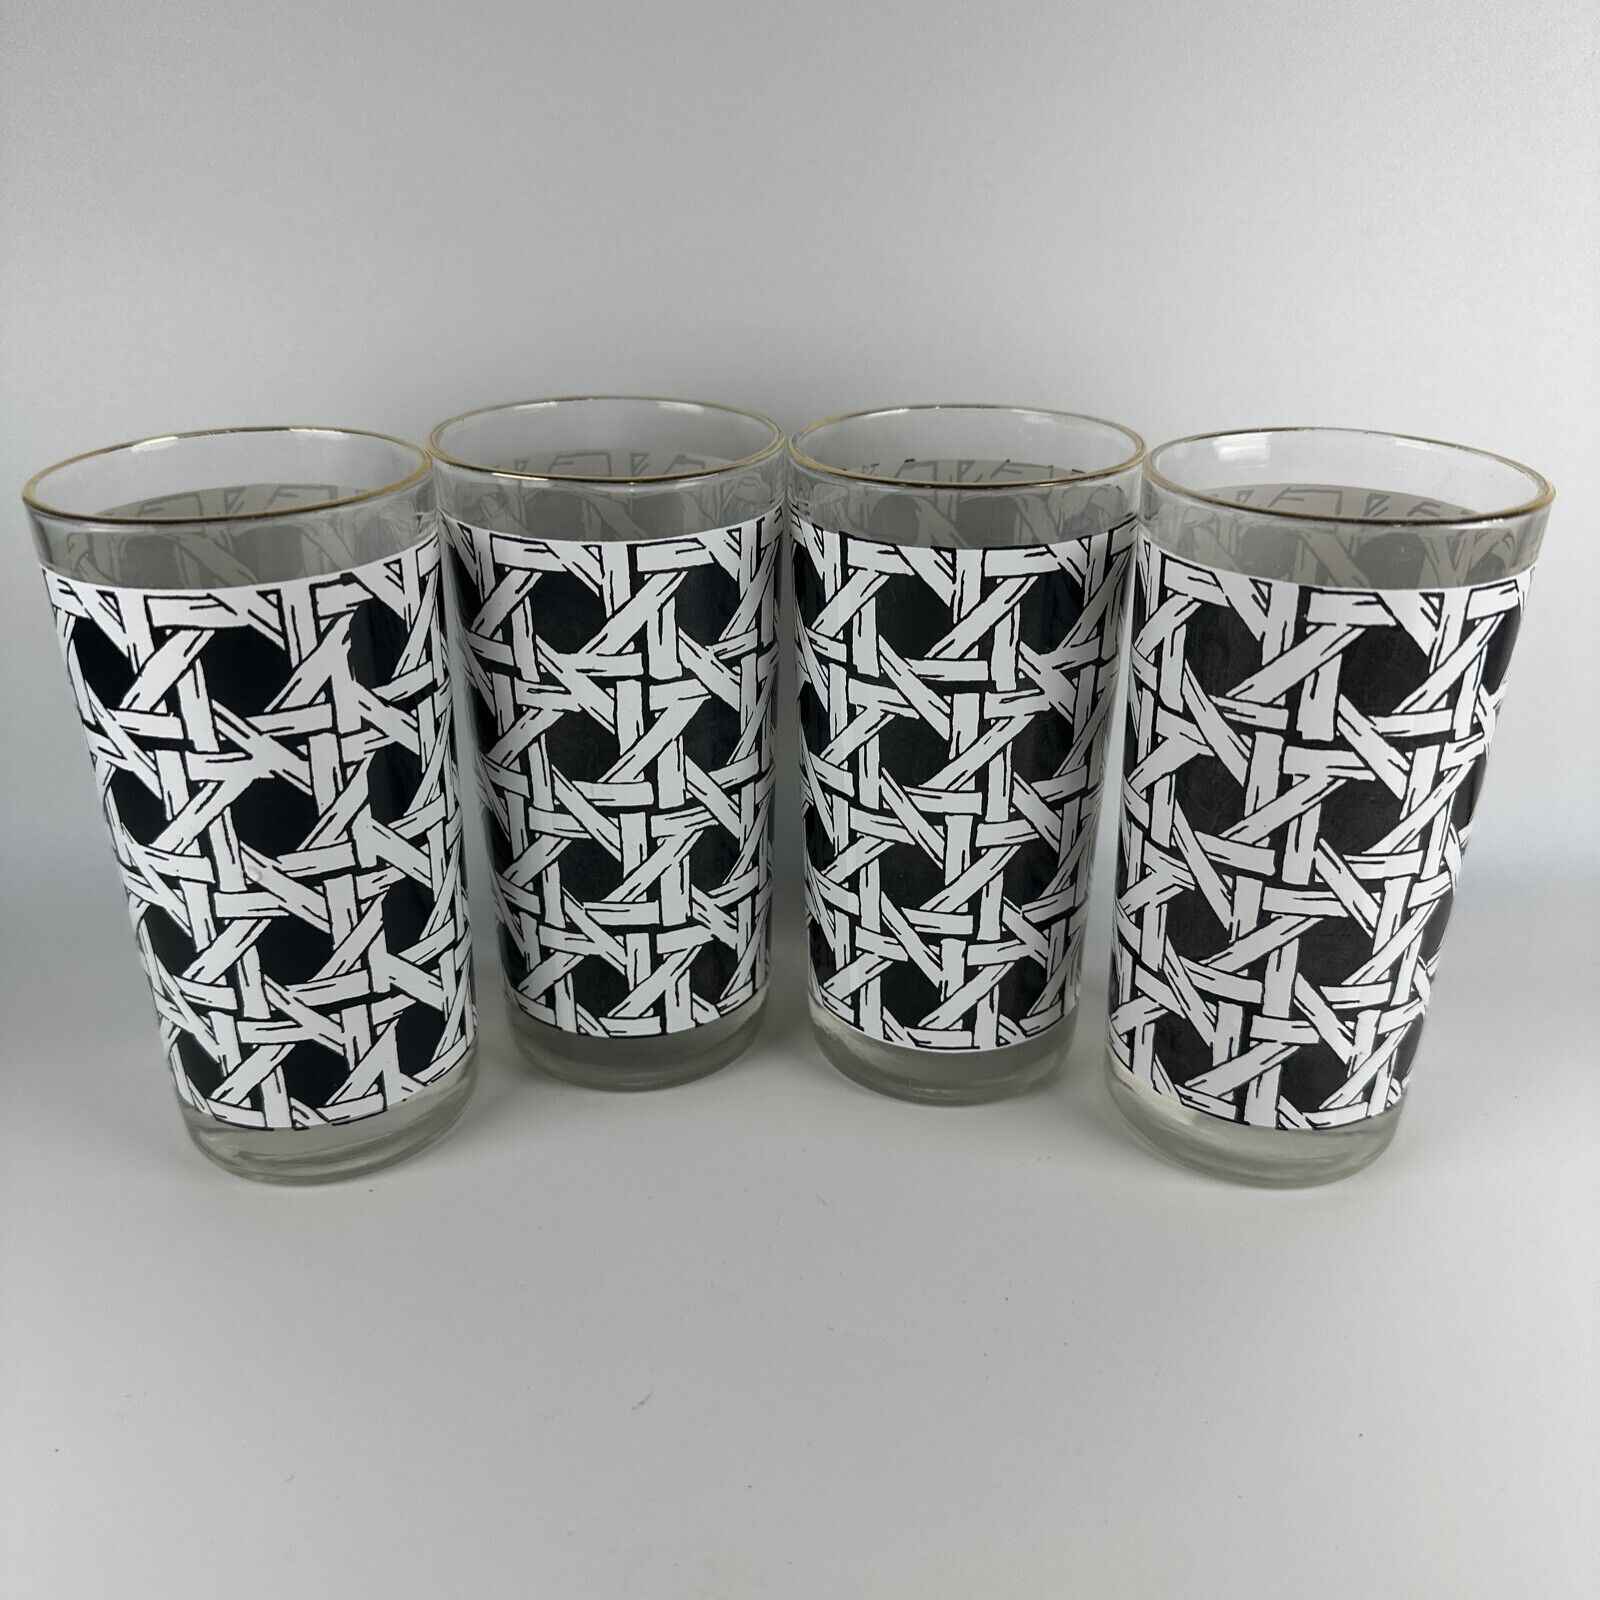 4 Vintage Georges Briard MCM Black & White Wicker Woven Pattern Glass Tumblers